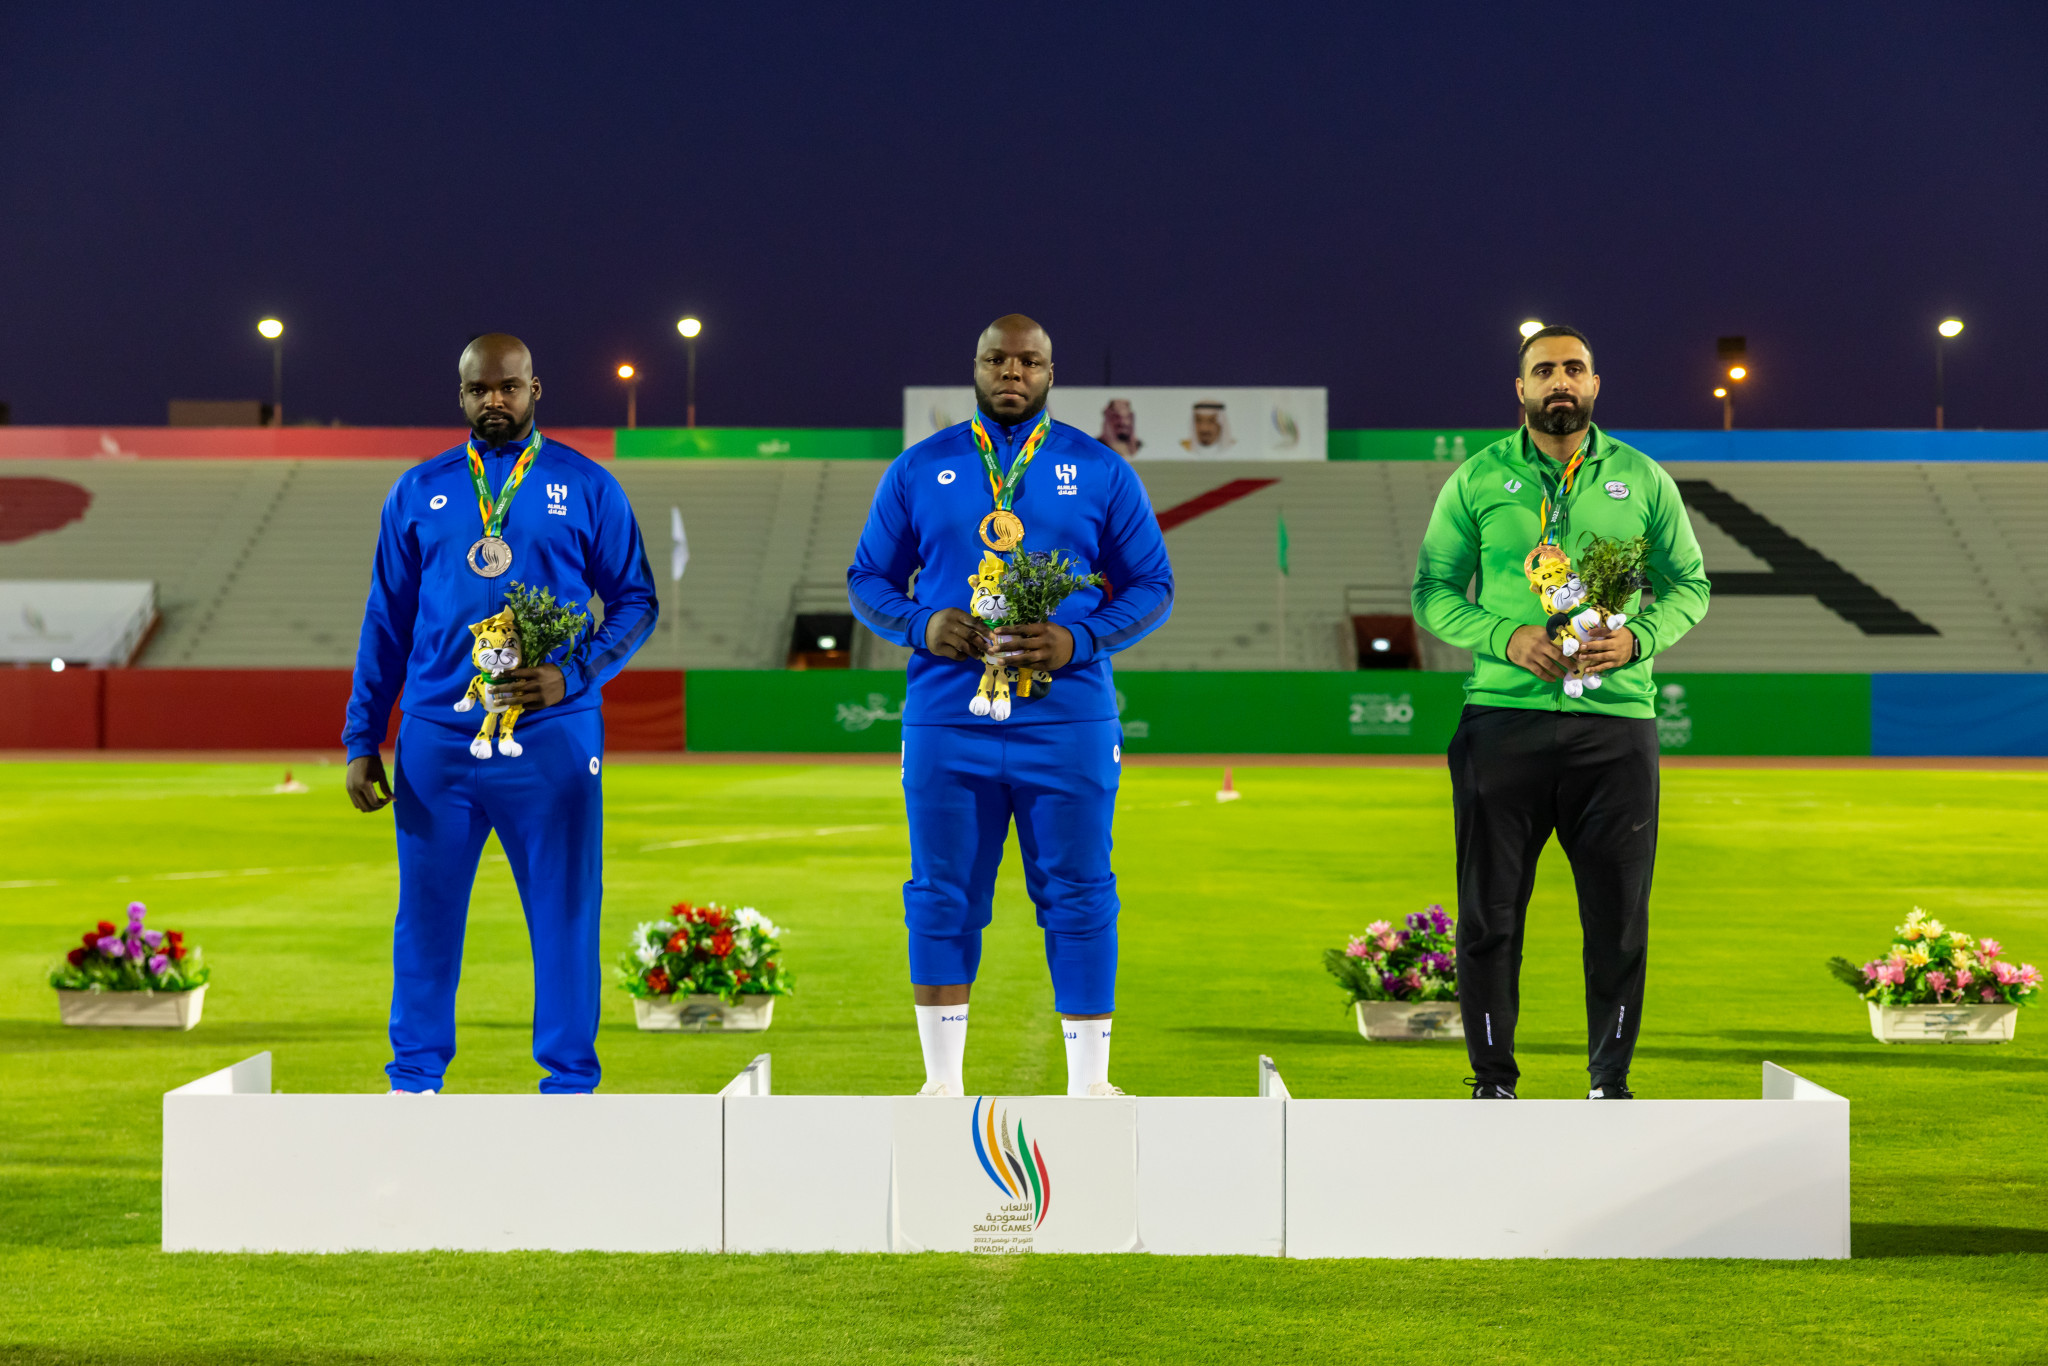 Mohammed Tolo won the men's discus with Abo Baker Zakaria, left and Osama Al-Oqaili, right, joining him ©Saudi Games